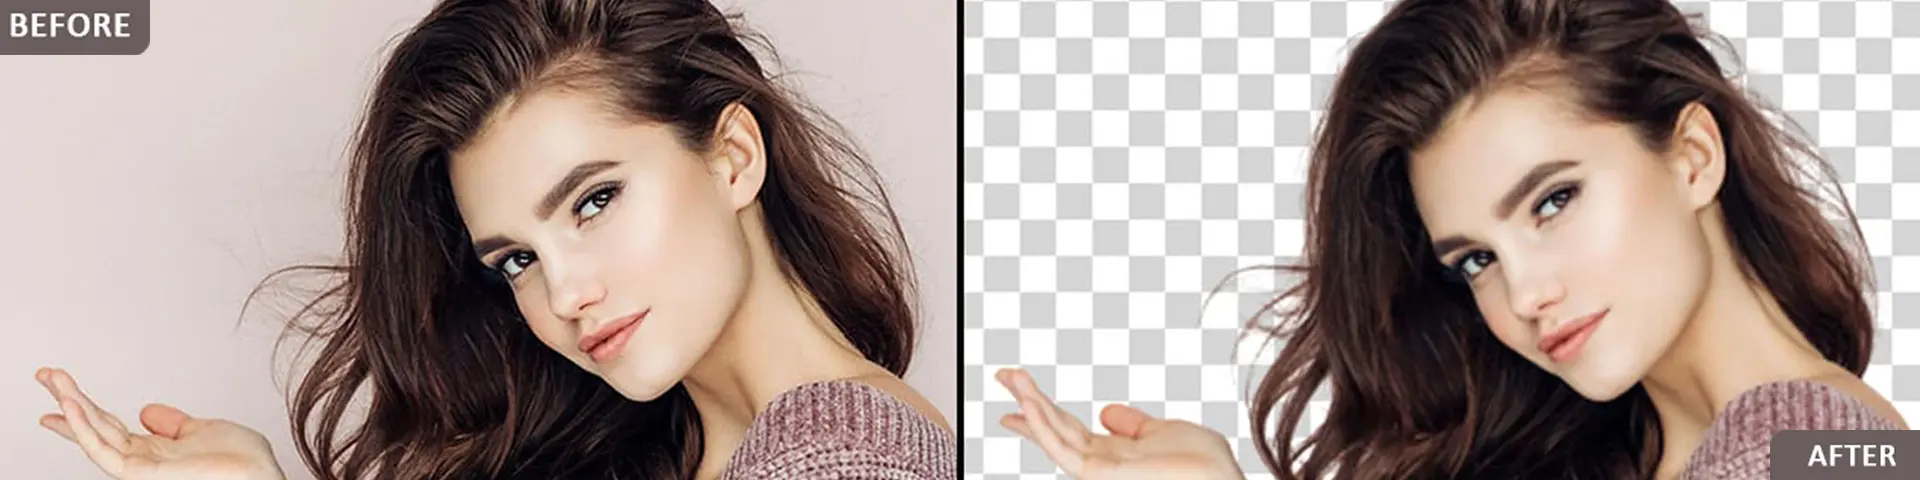 image background removal and changer services